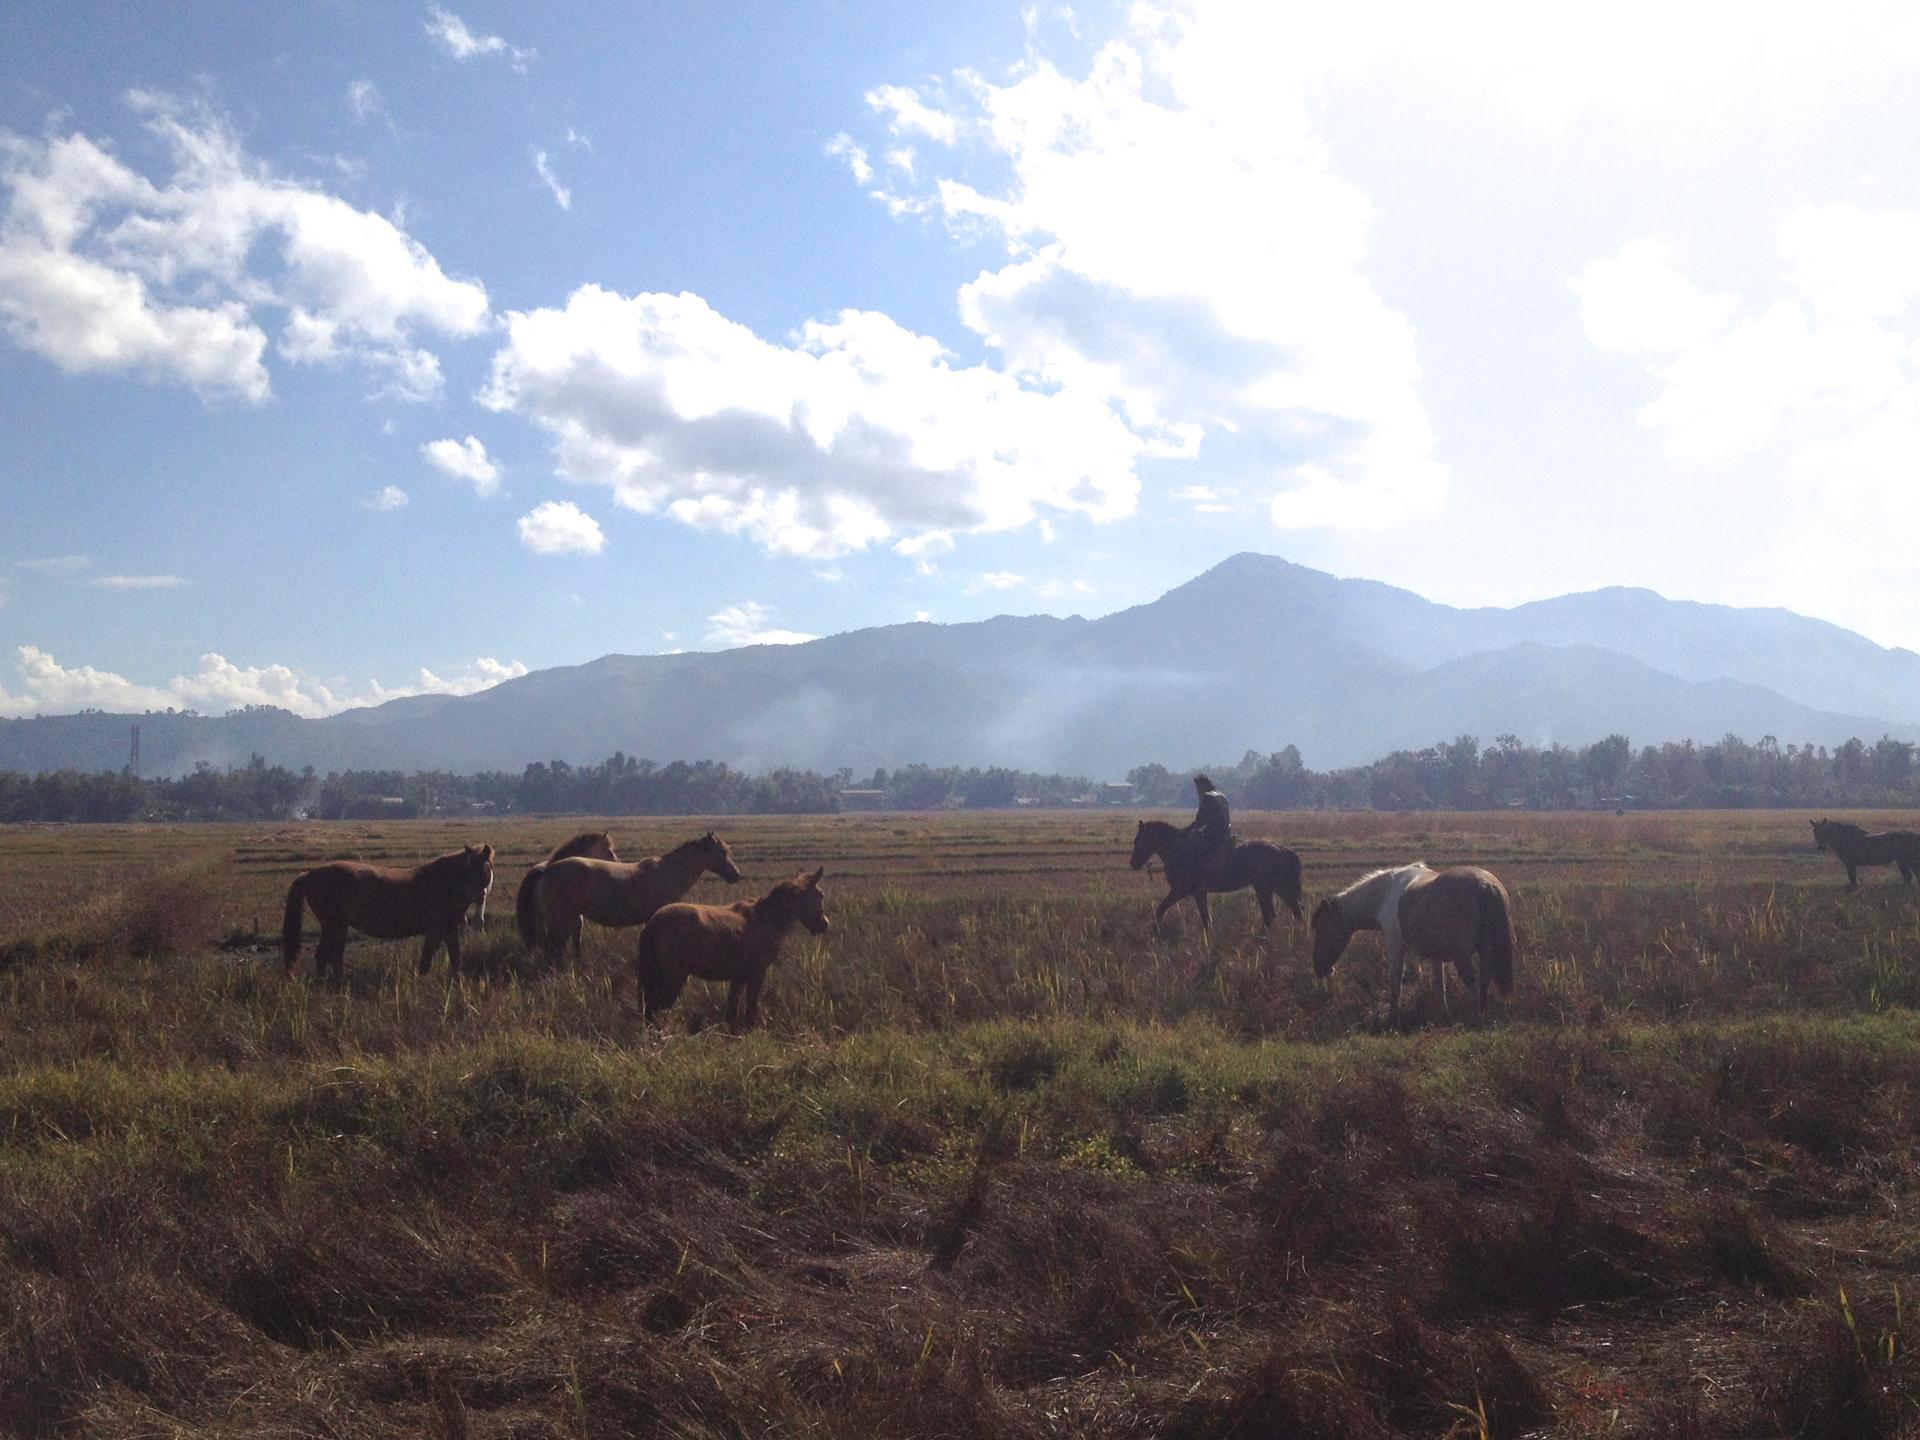 Manipuri ponies grazing. The state of Manipur has pledge to create a sanctuary for the ancient breed whose numbers are dwindling.